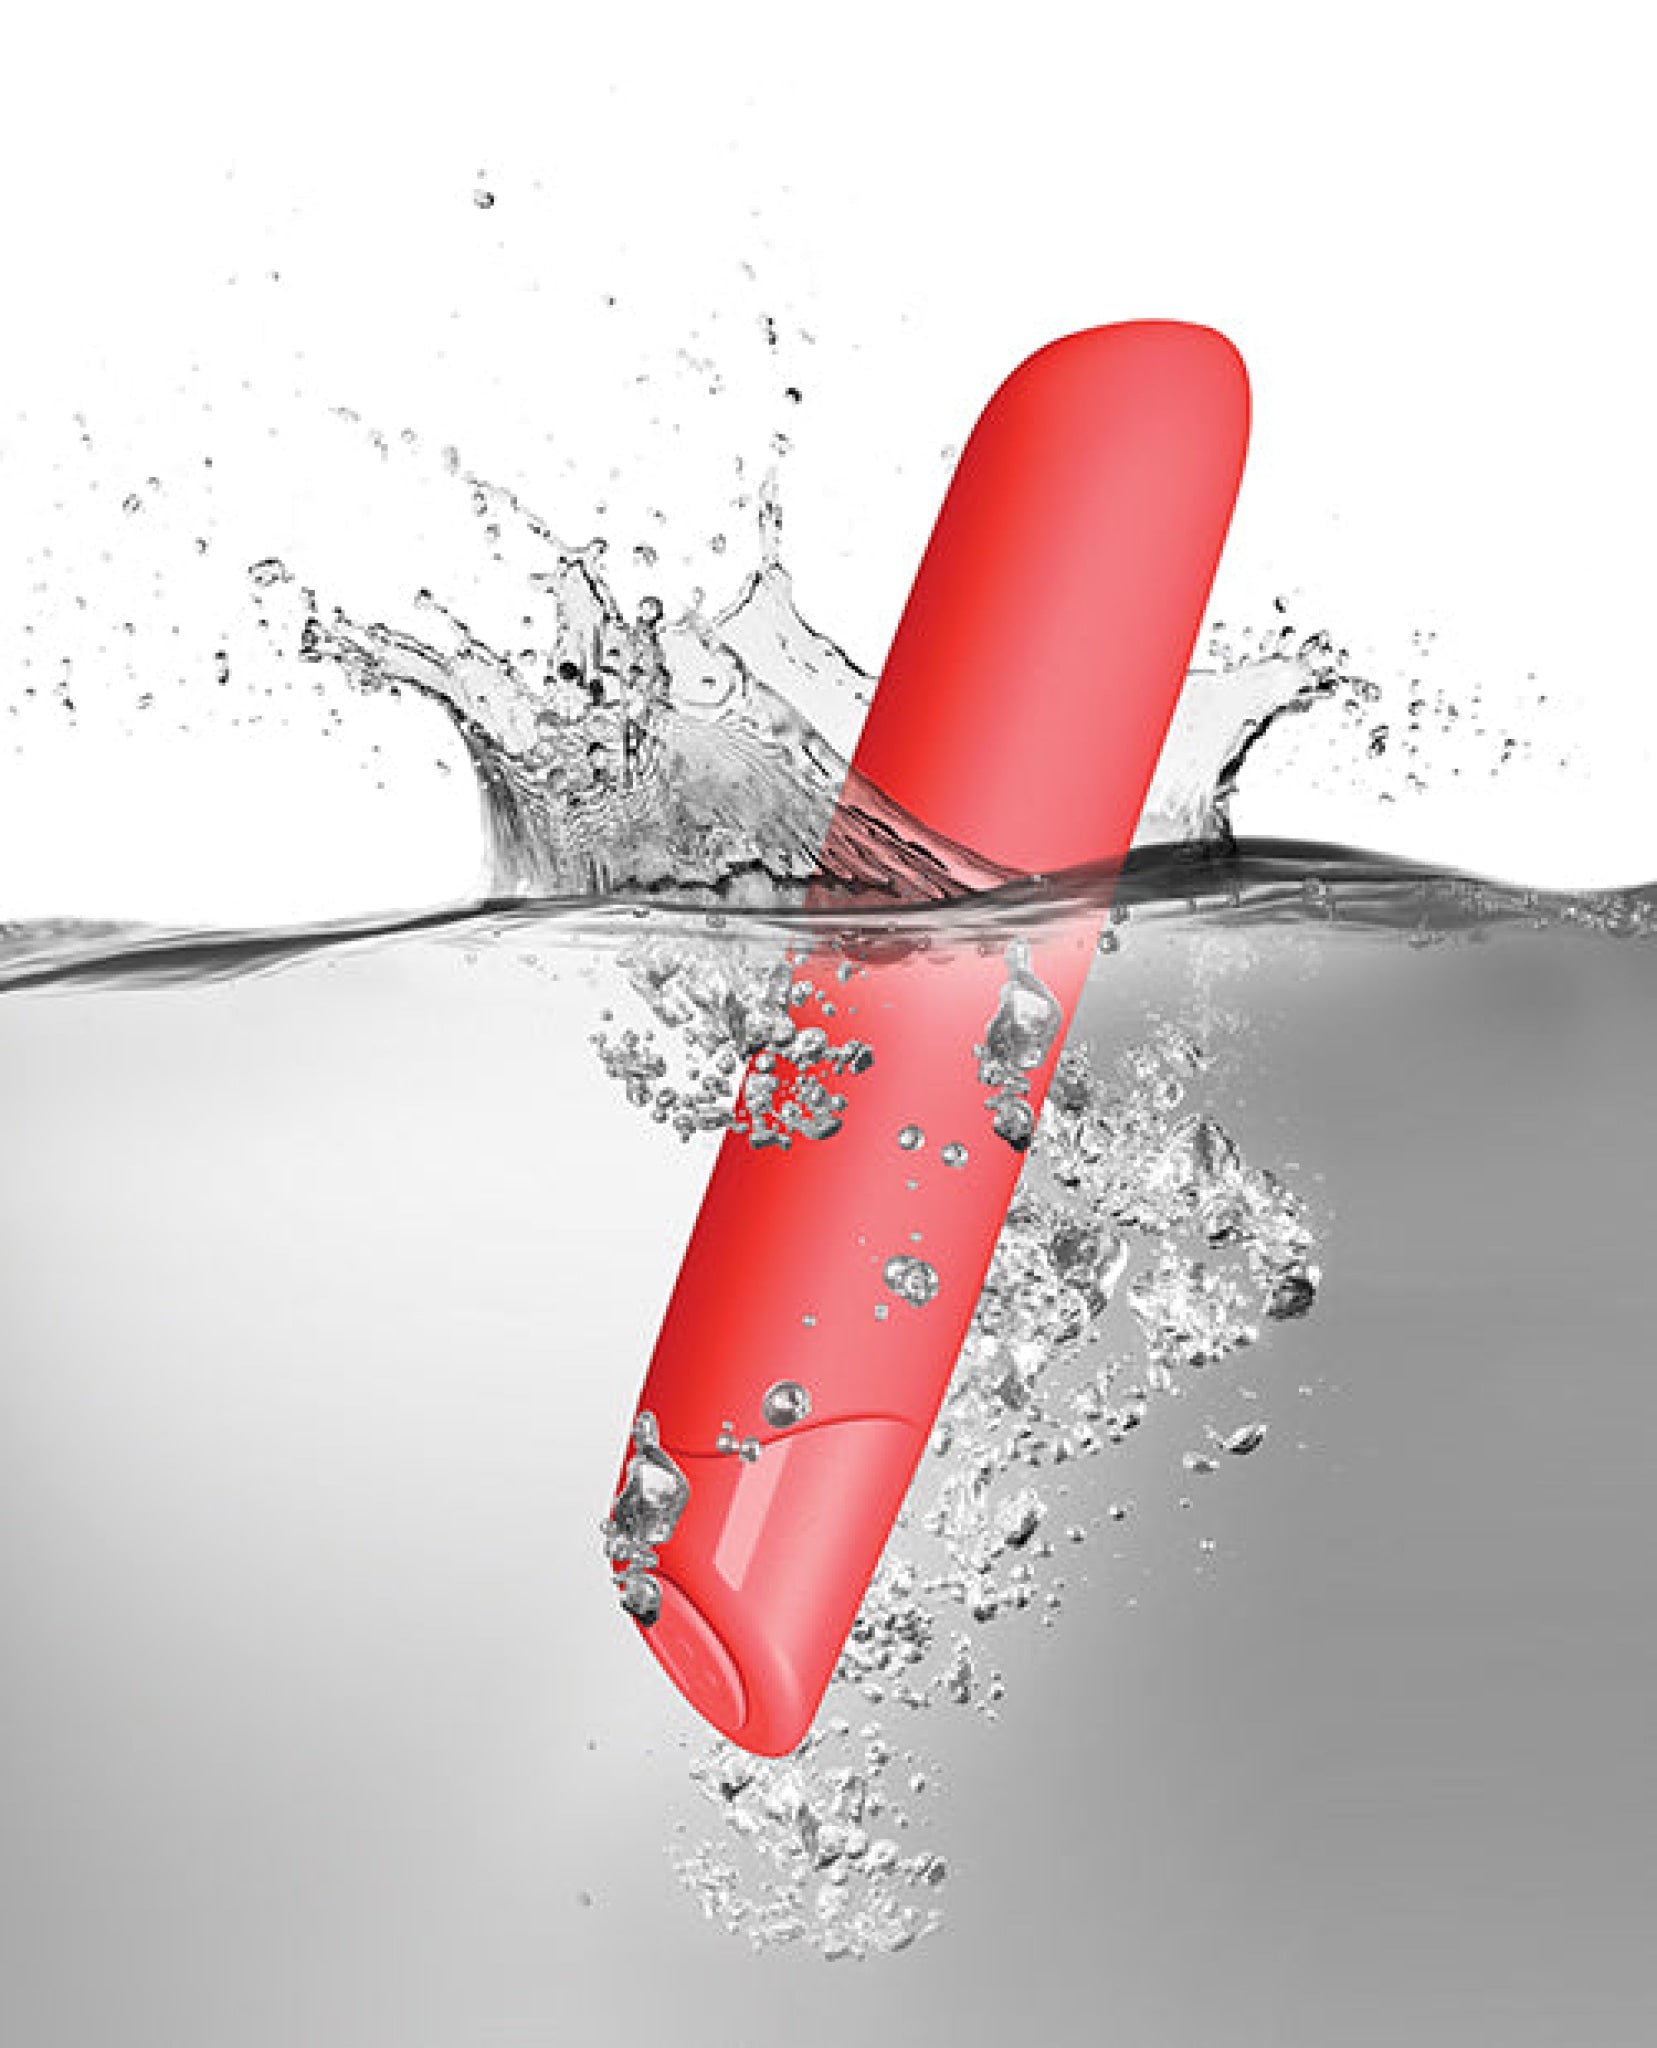 Sugarboo Cool Coral Rechargeable Vibrator - Coral Rocks-off